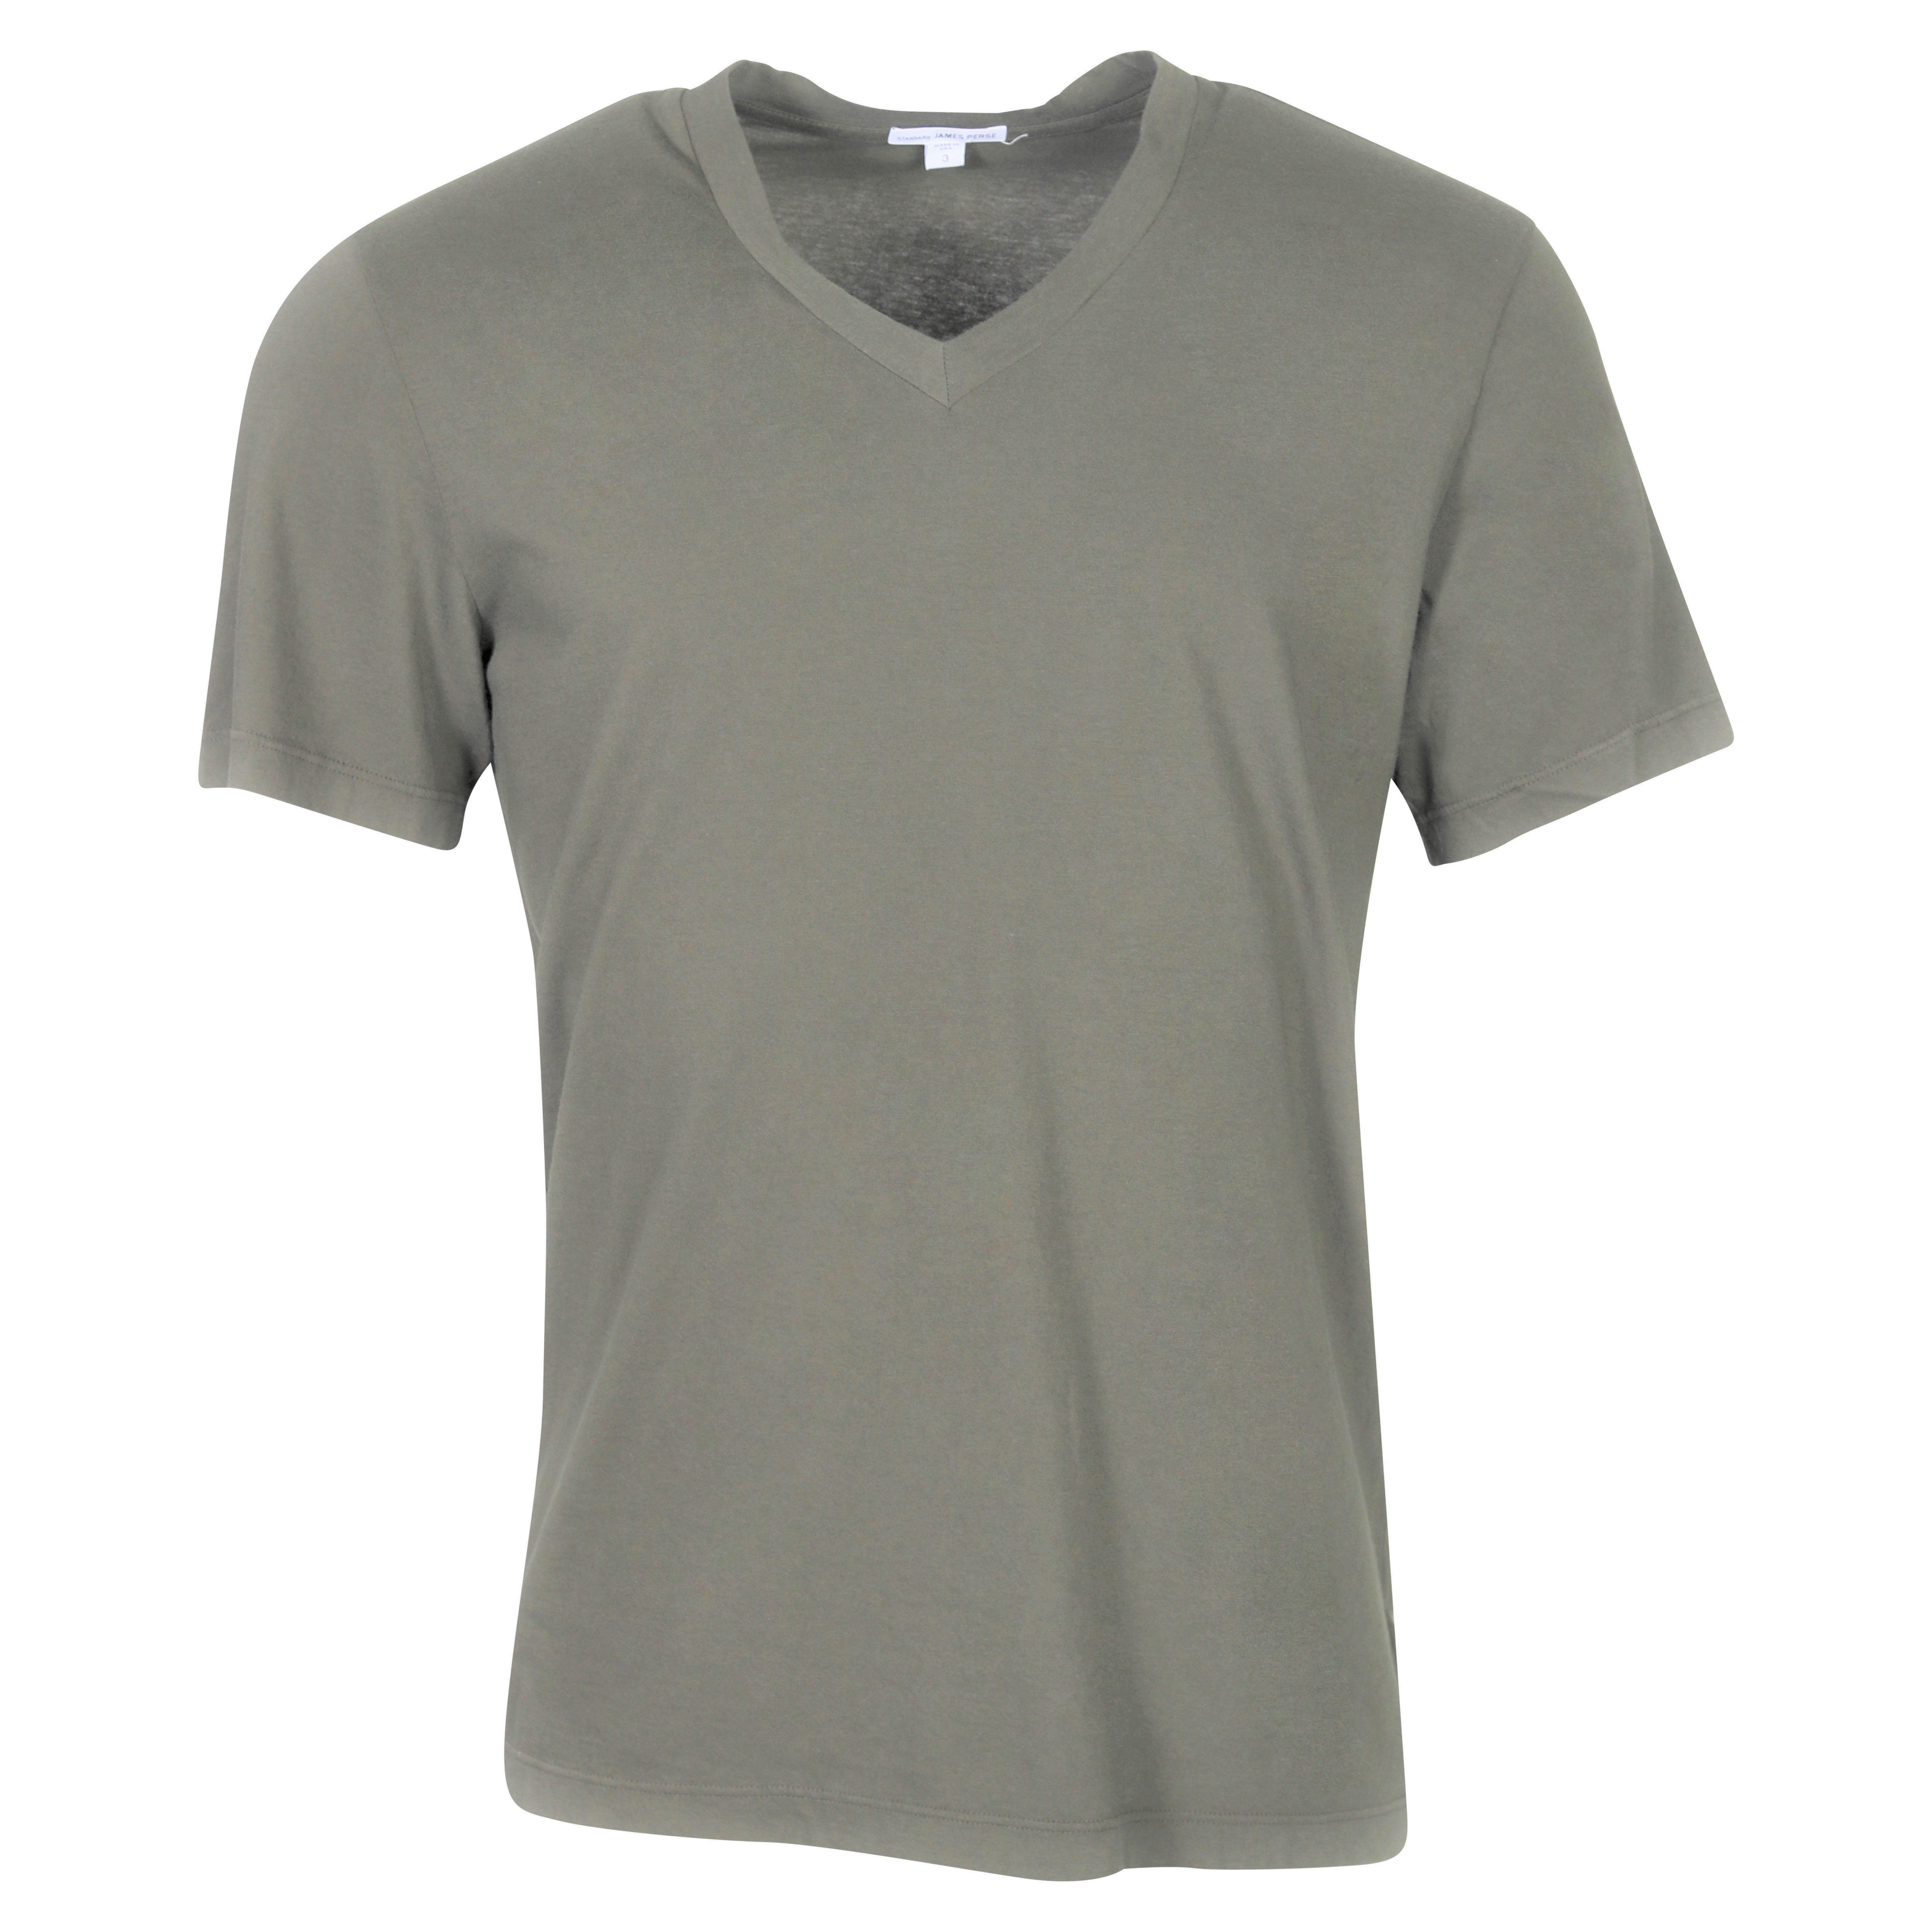 James Perse T-Shirt V-Neck in Jungle